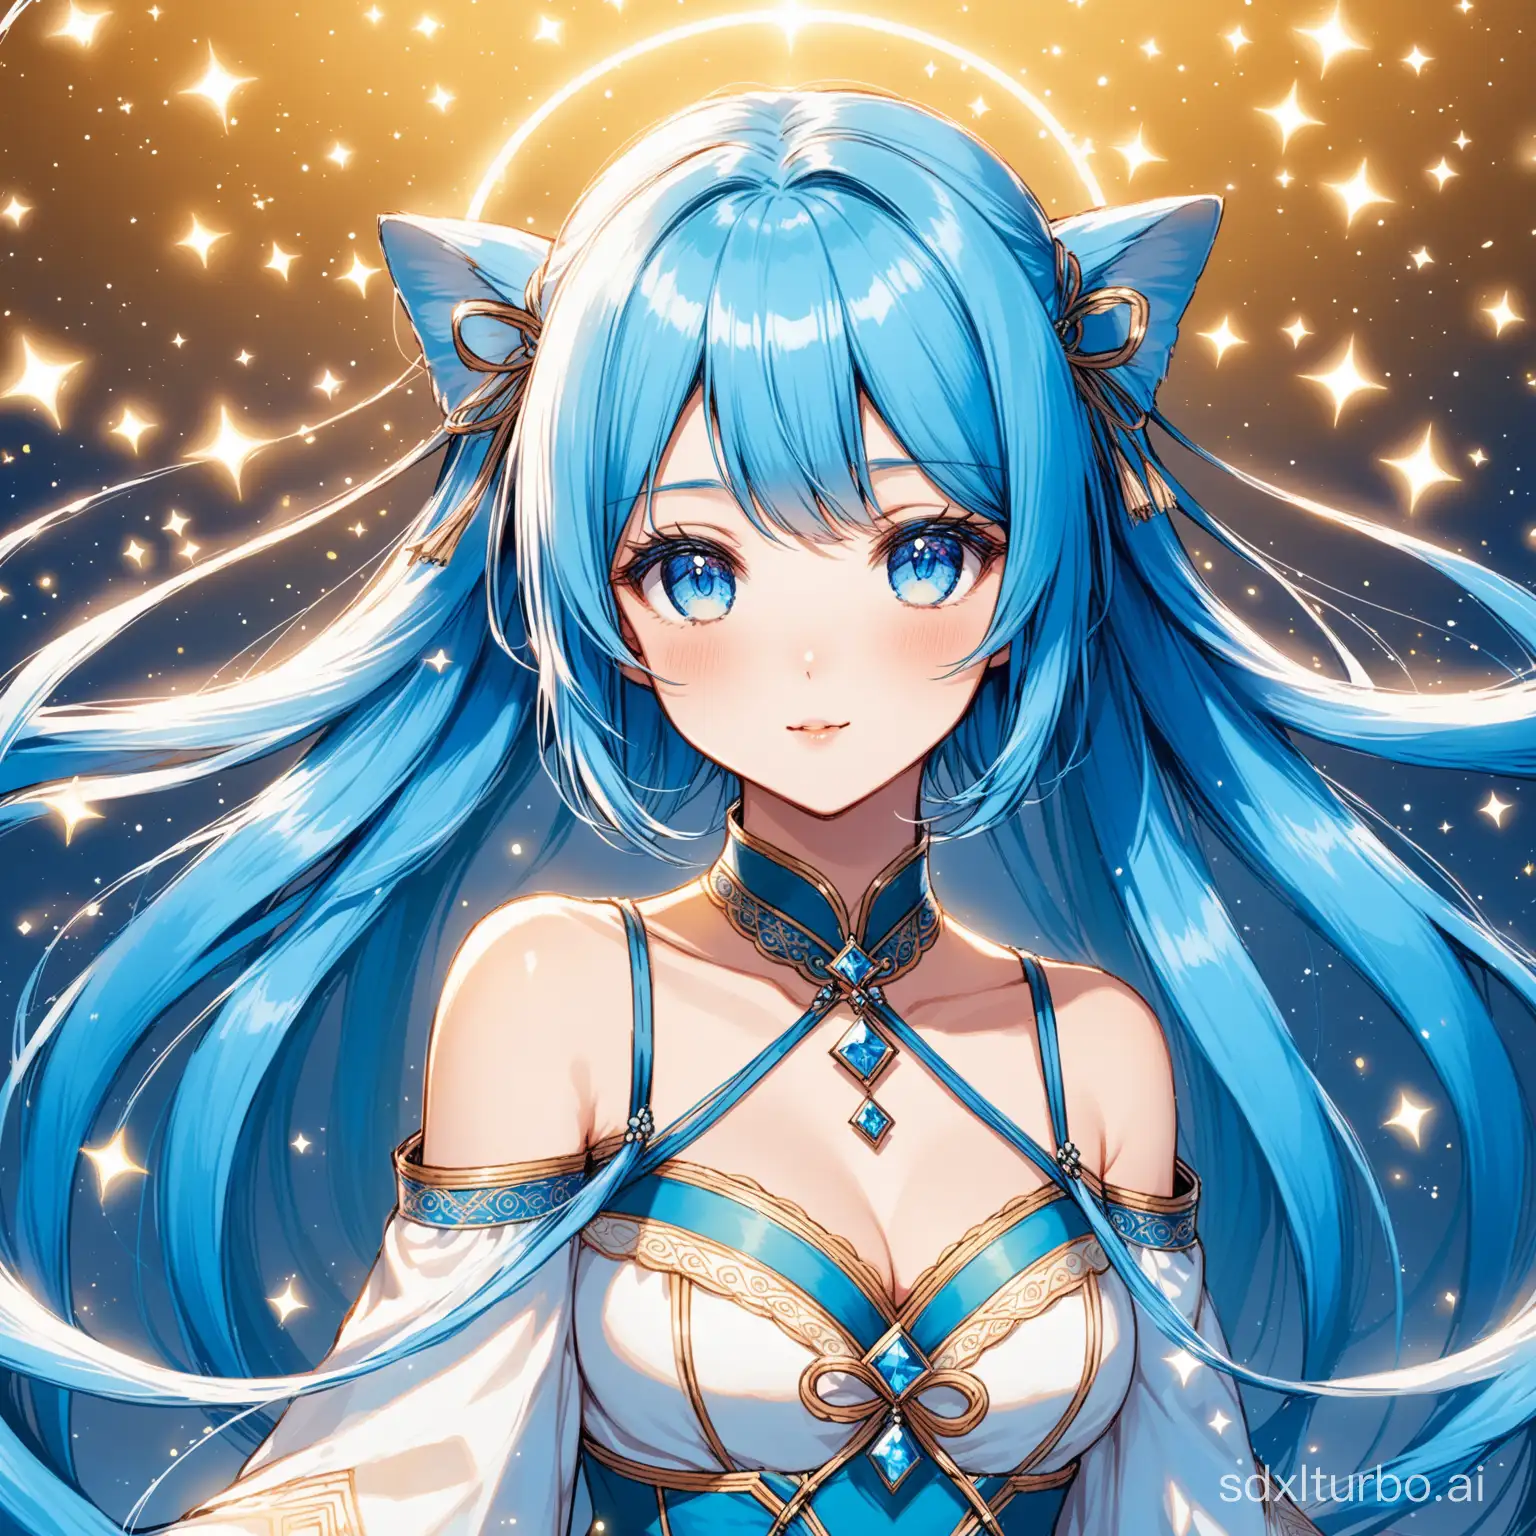 TwinTailed-BlueHaired-Songstress-Beauty-in-TwoDimensional-Art